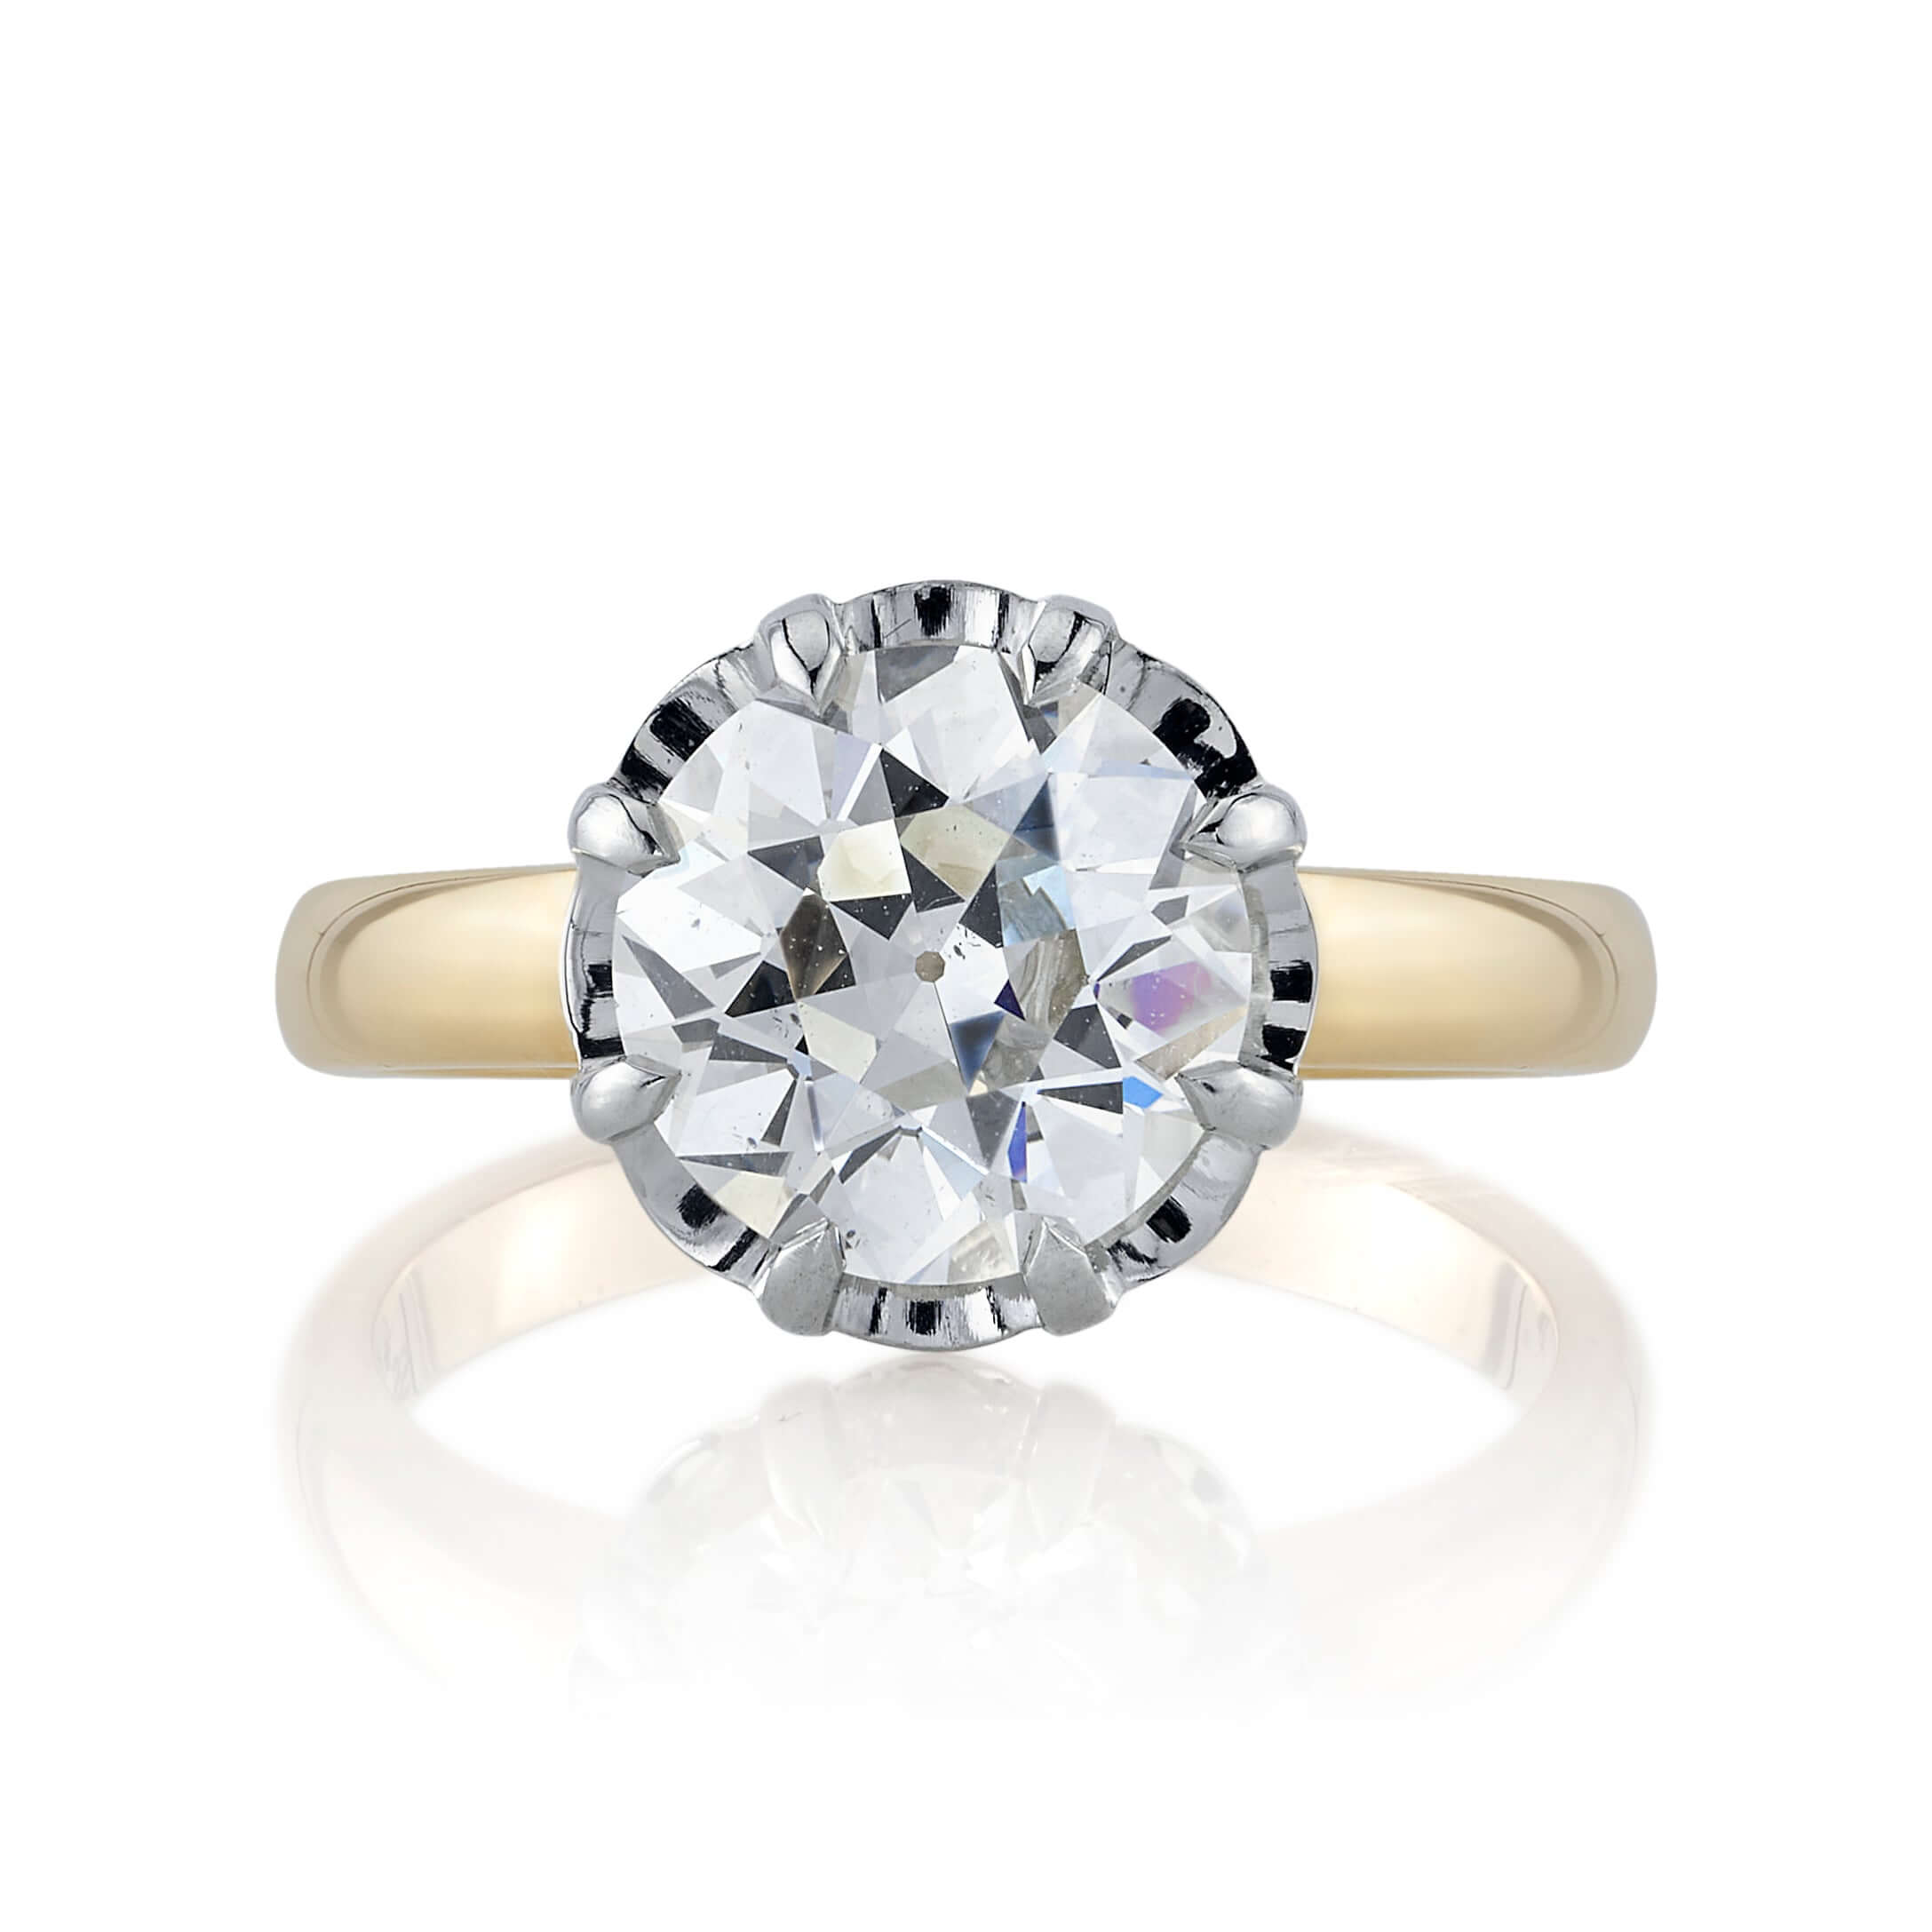 SINGLE STONE JOLENE RING featuring 2.63ct J/SI1 GIA certified old European cut diamond set in a handcrafted 18K yellow gold and platinum mounting.